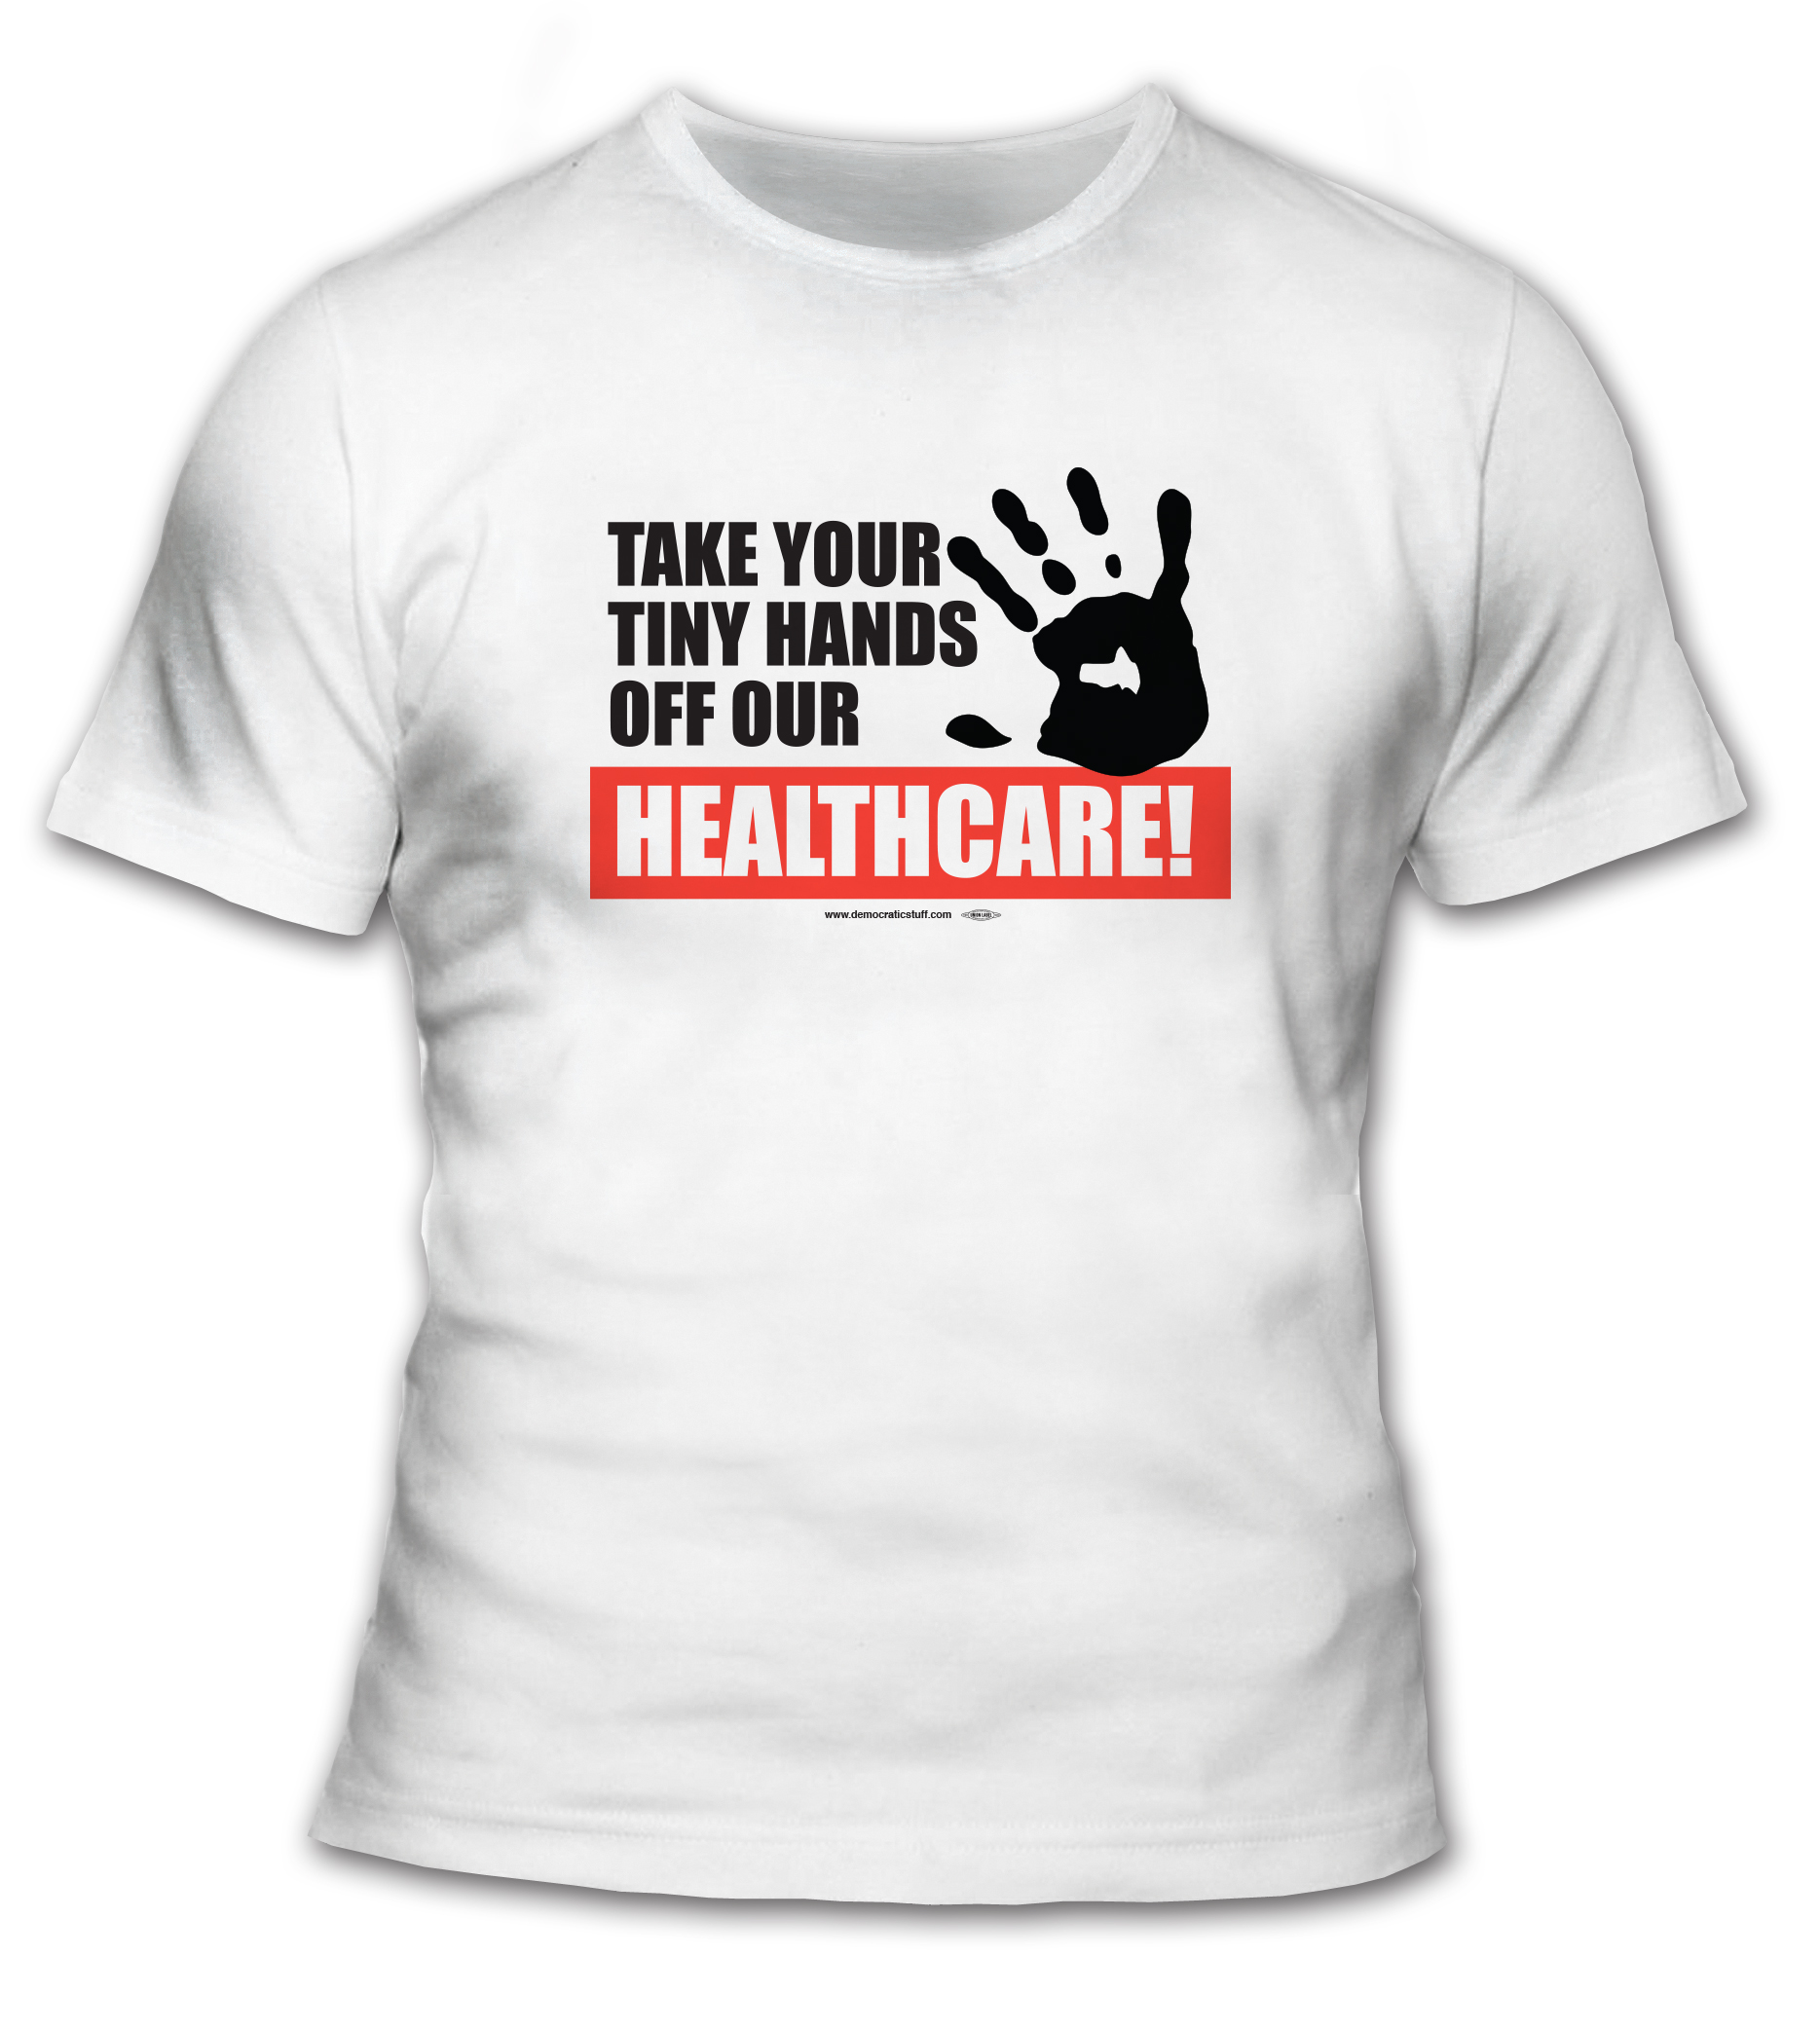 Keep Your Tiny Hands Off Our Healthcare T-Shirt - #TS55099 ...